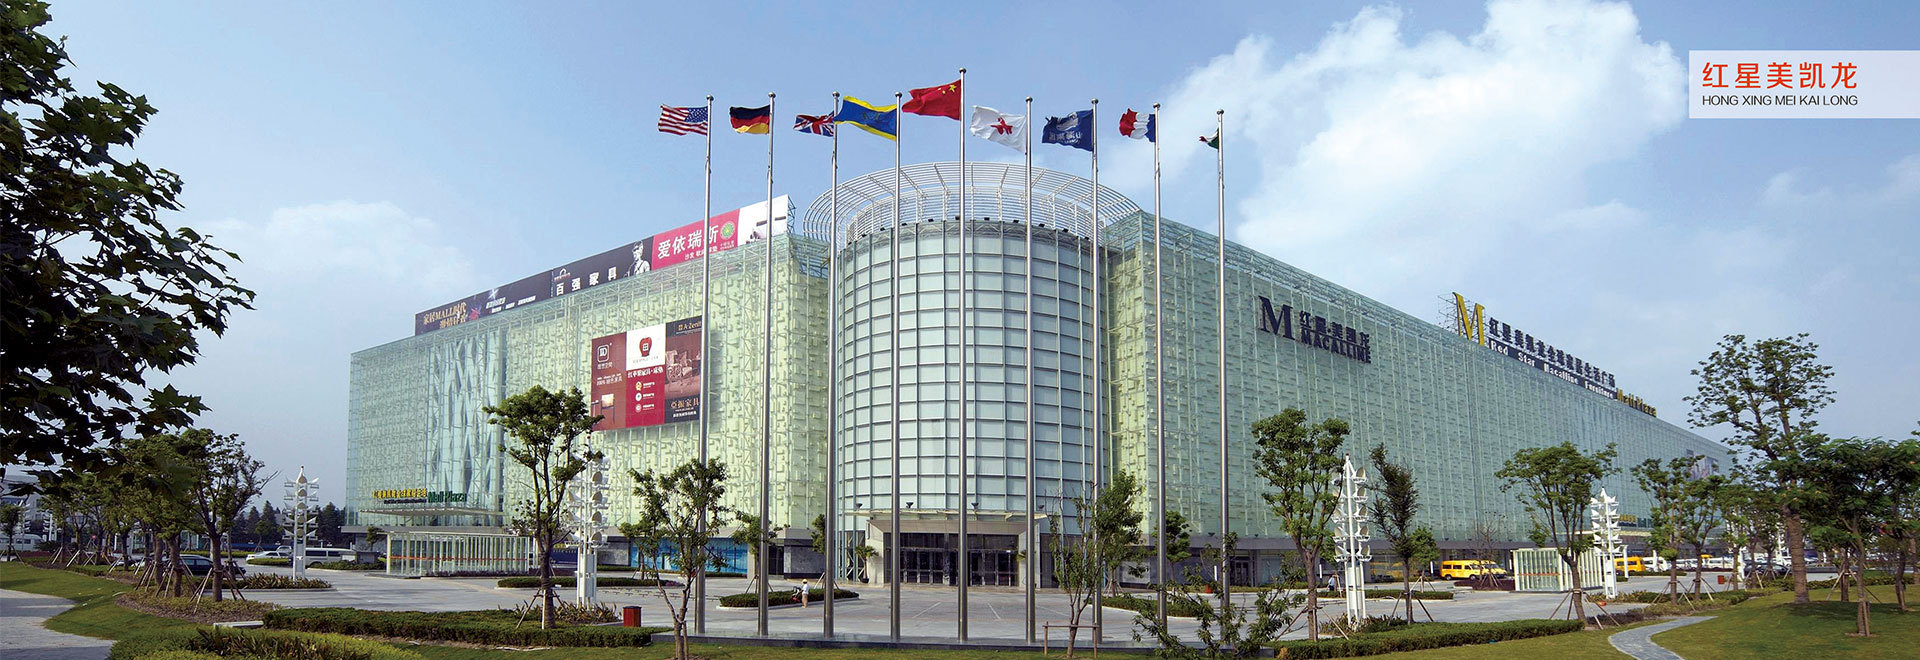 Taishan International Convention and Exhibition Center